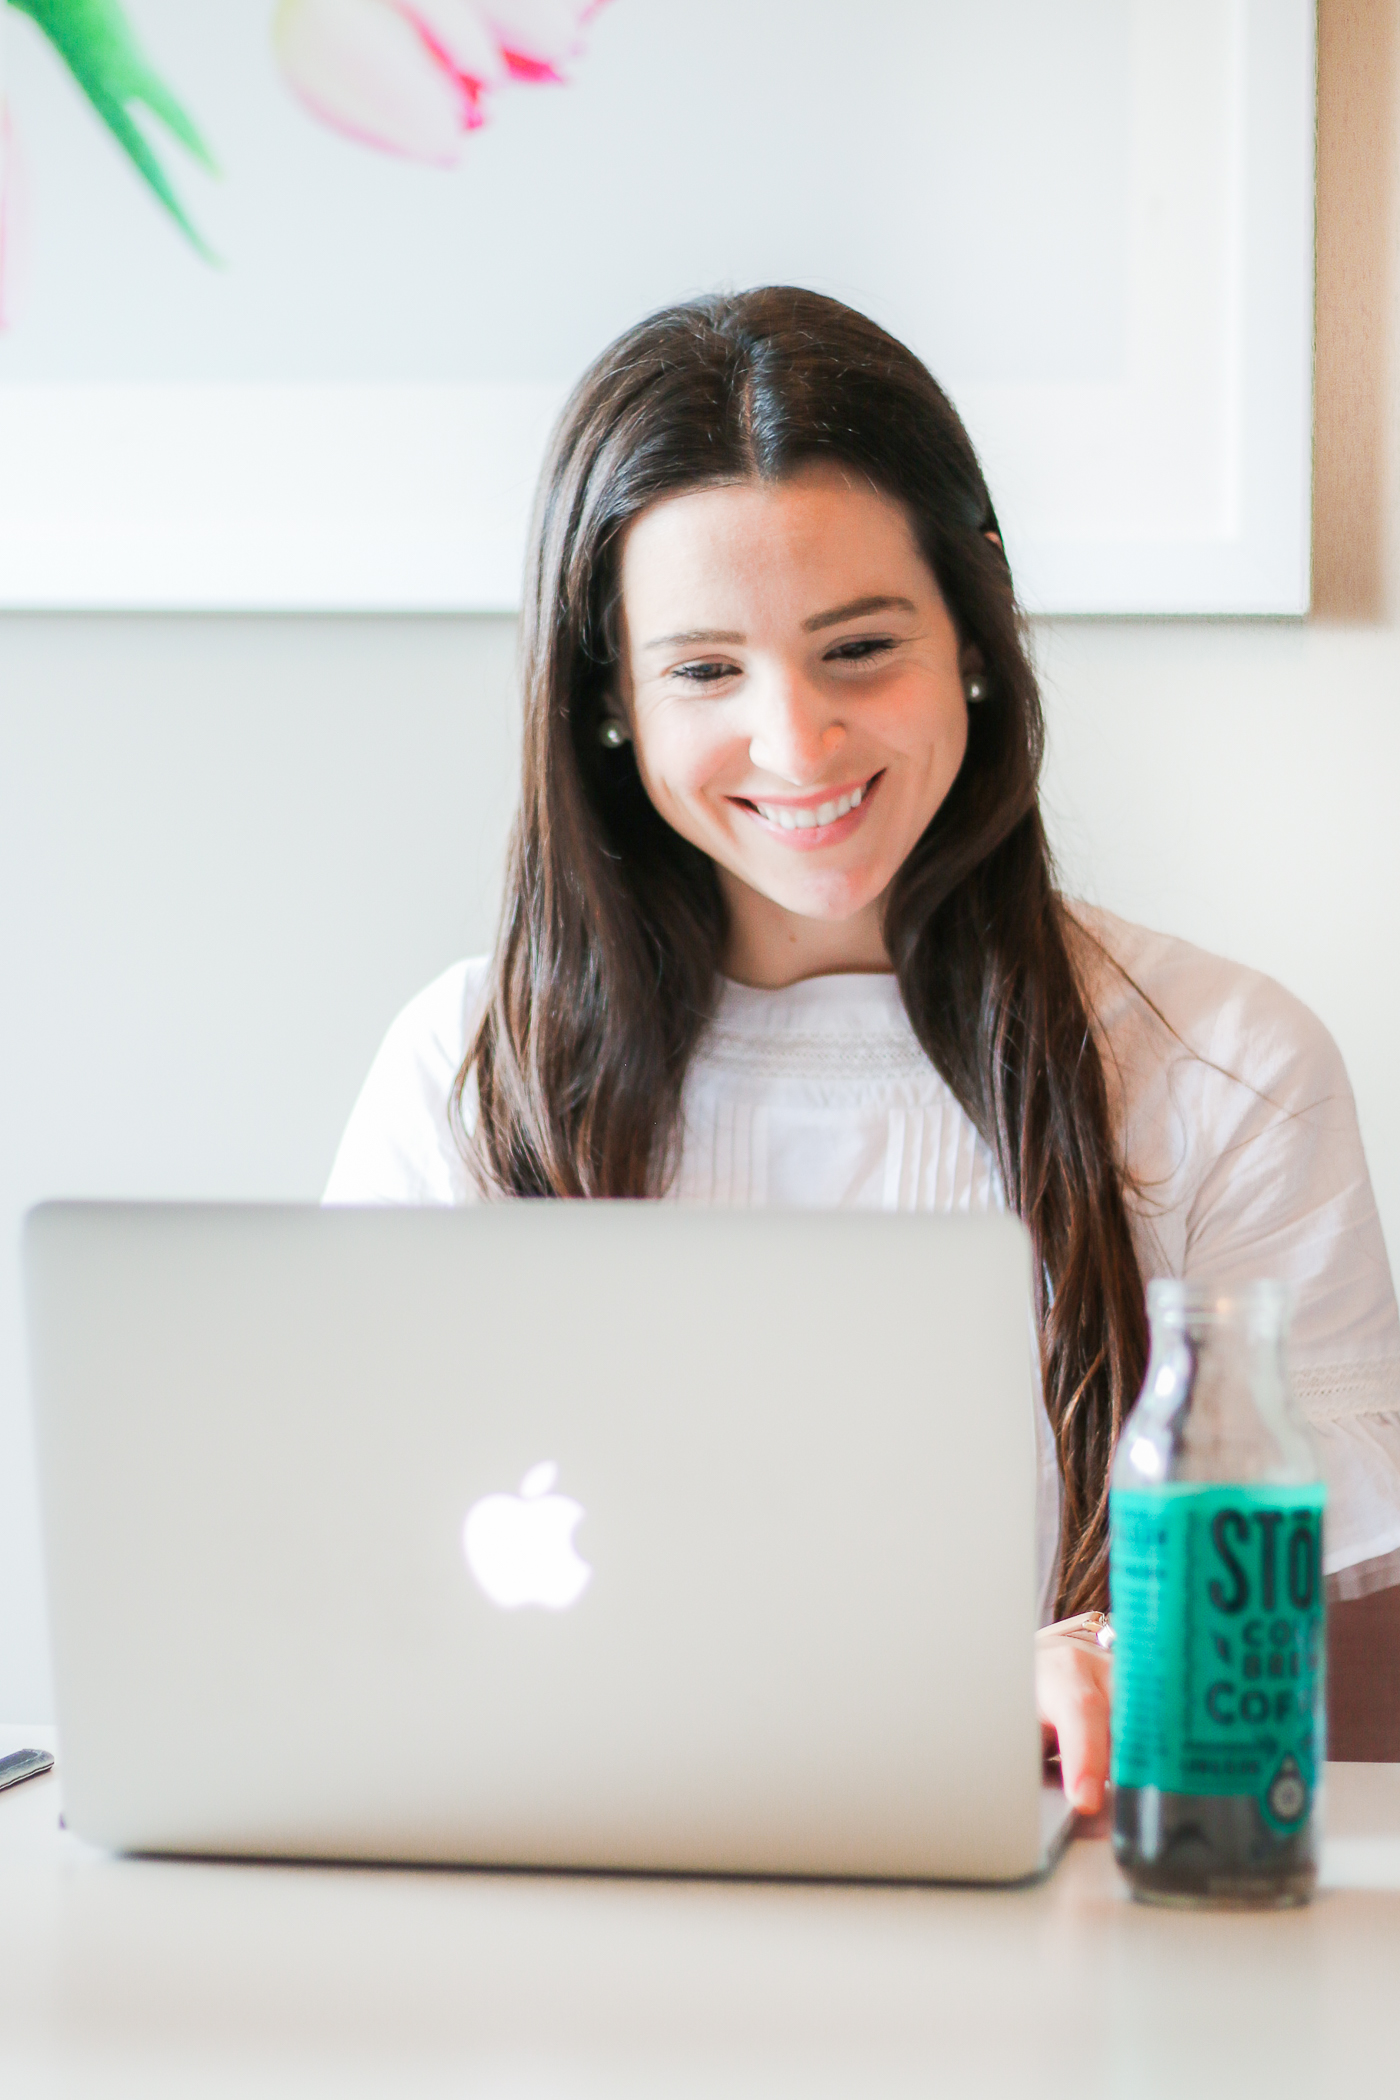 How to Become a Full Time Blogger: A Simple 5-Step Guide by full time fashion blogger Stephanie Ziajka from Diary of a Debutante, tips for becoming a full time blogger, how to make blogging a full time job, Stok cold brew coffee review